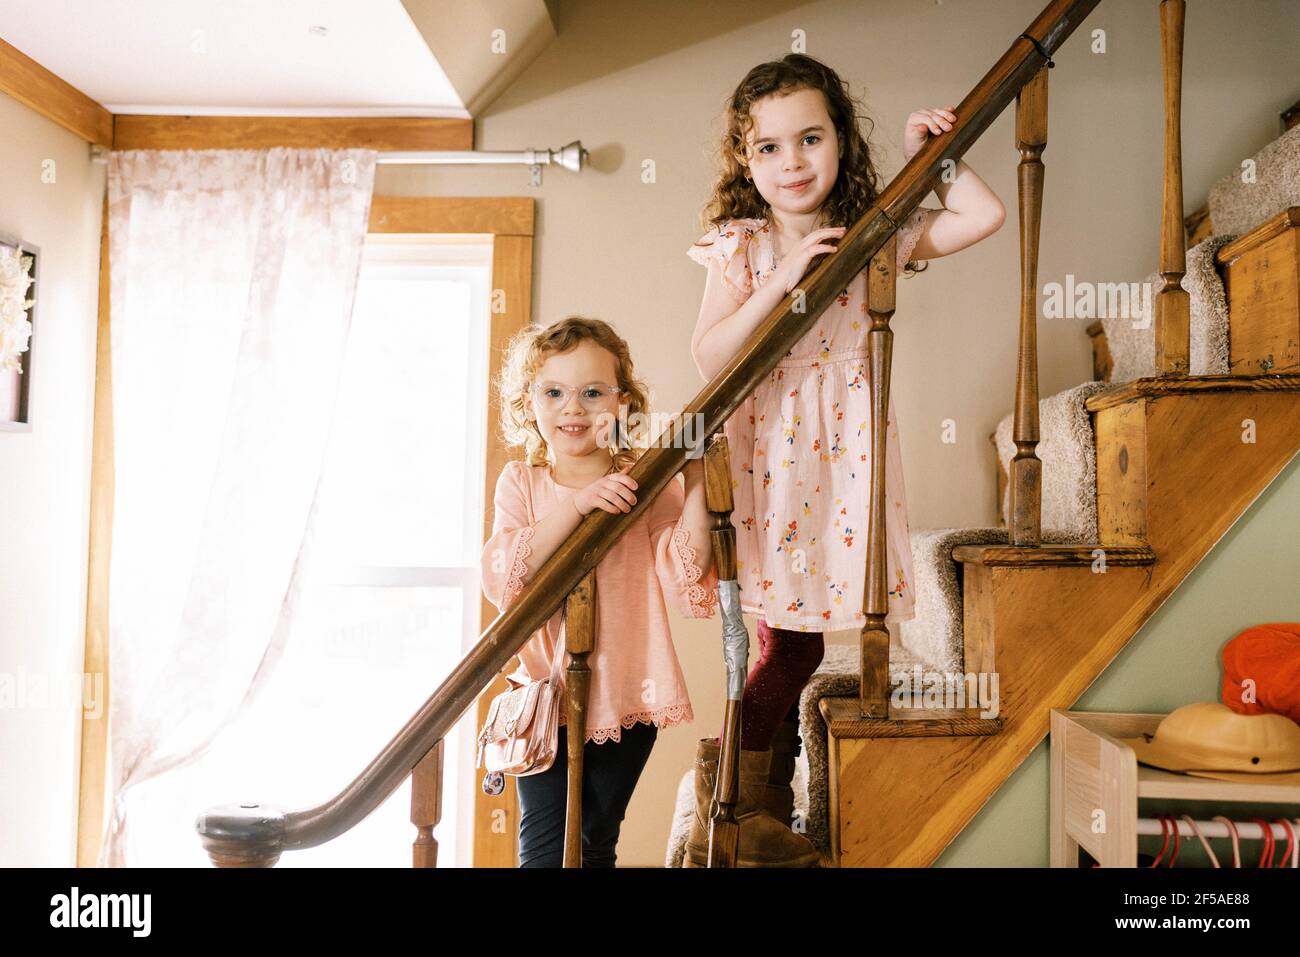 Big and little sister standing on wooden stair case together smiling Stock Photo